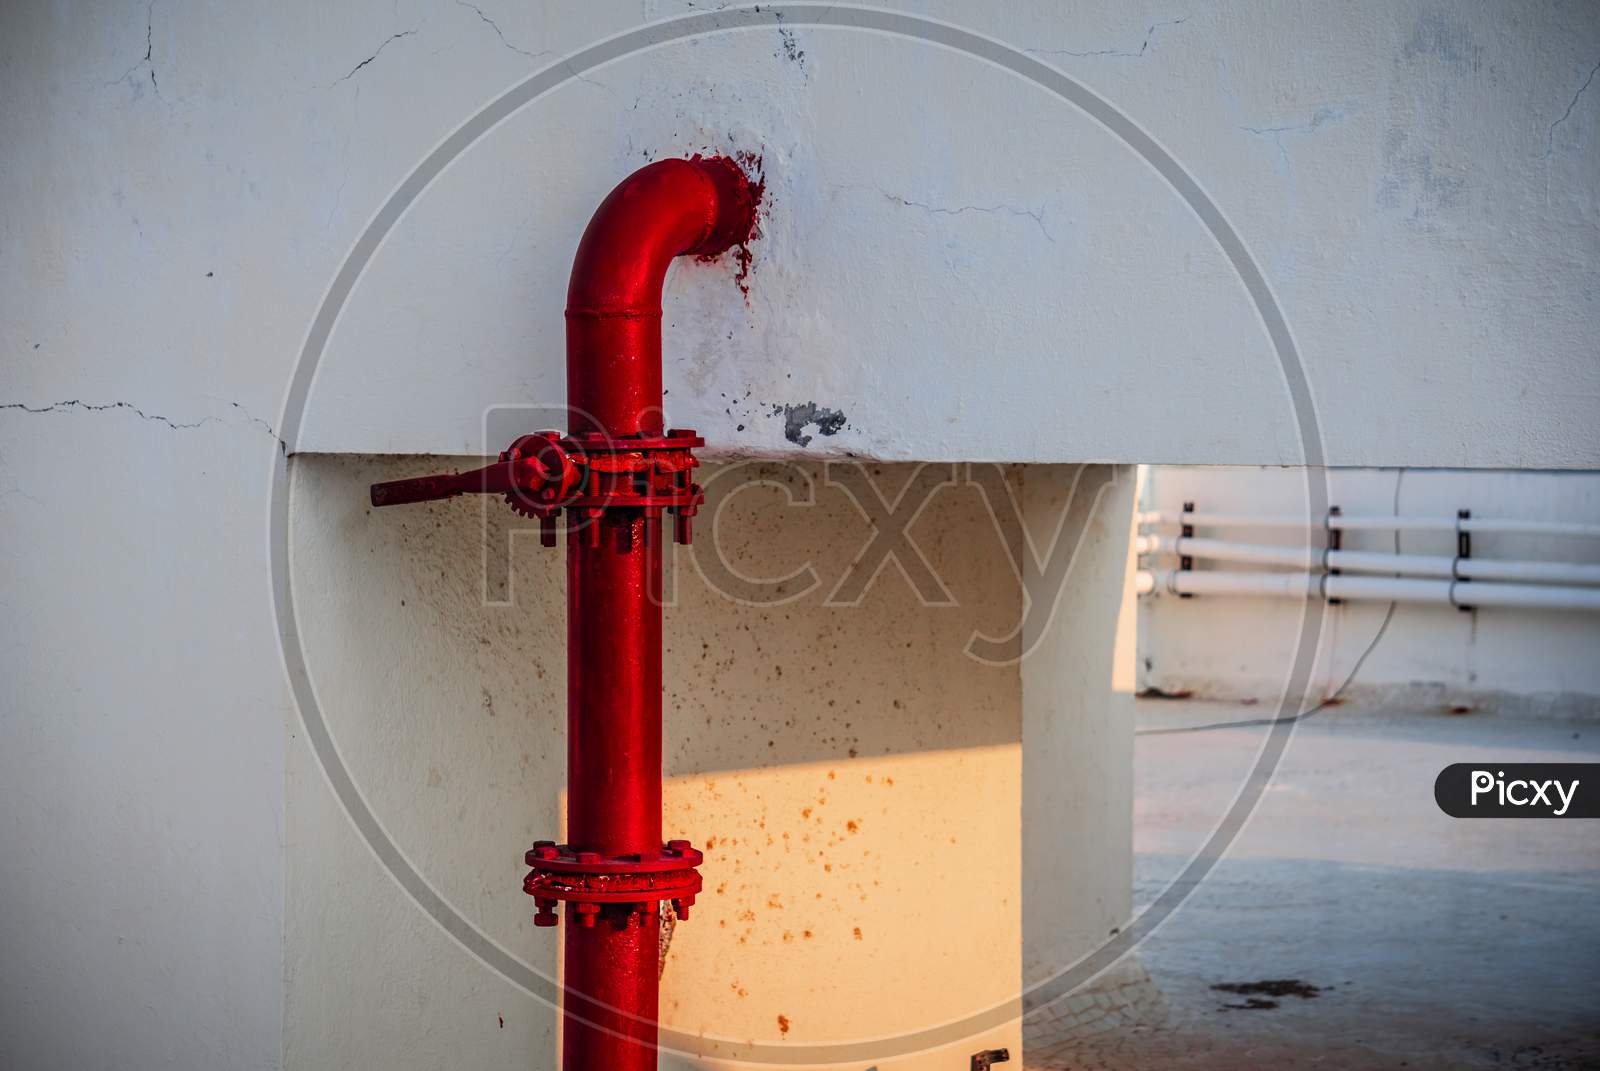 Red pipe of Fire Fighting systems is supplying water to the water sprinkler or private fire hydrants. Pipeline and valve arrangement connected from the water tank